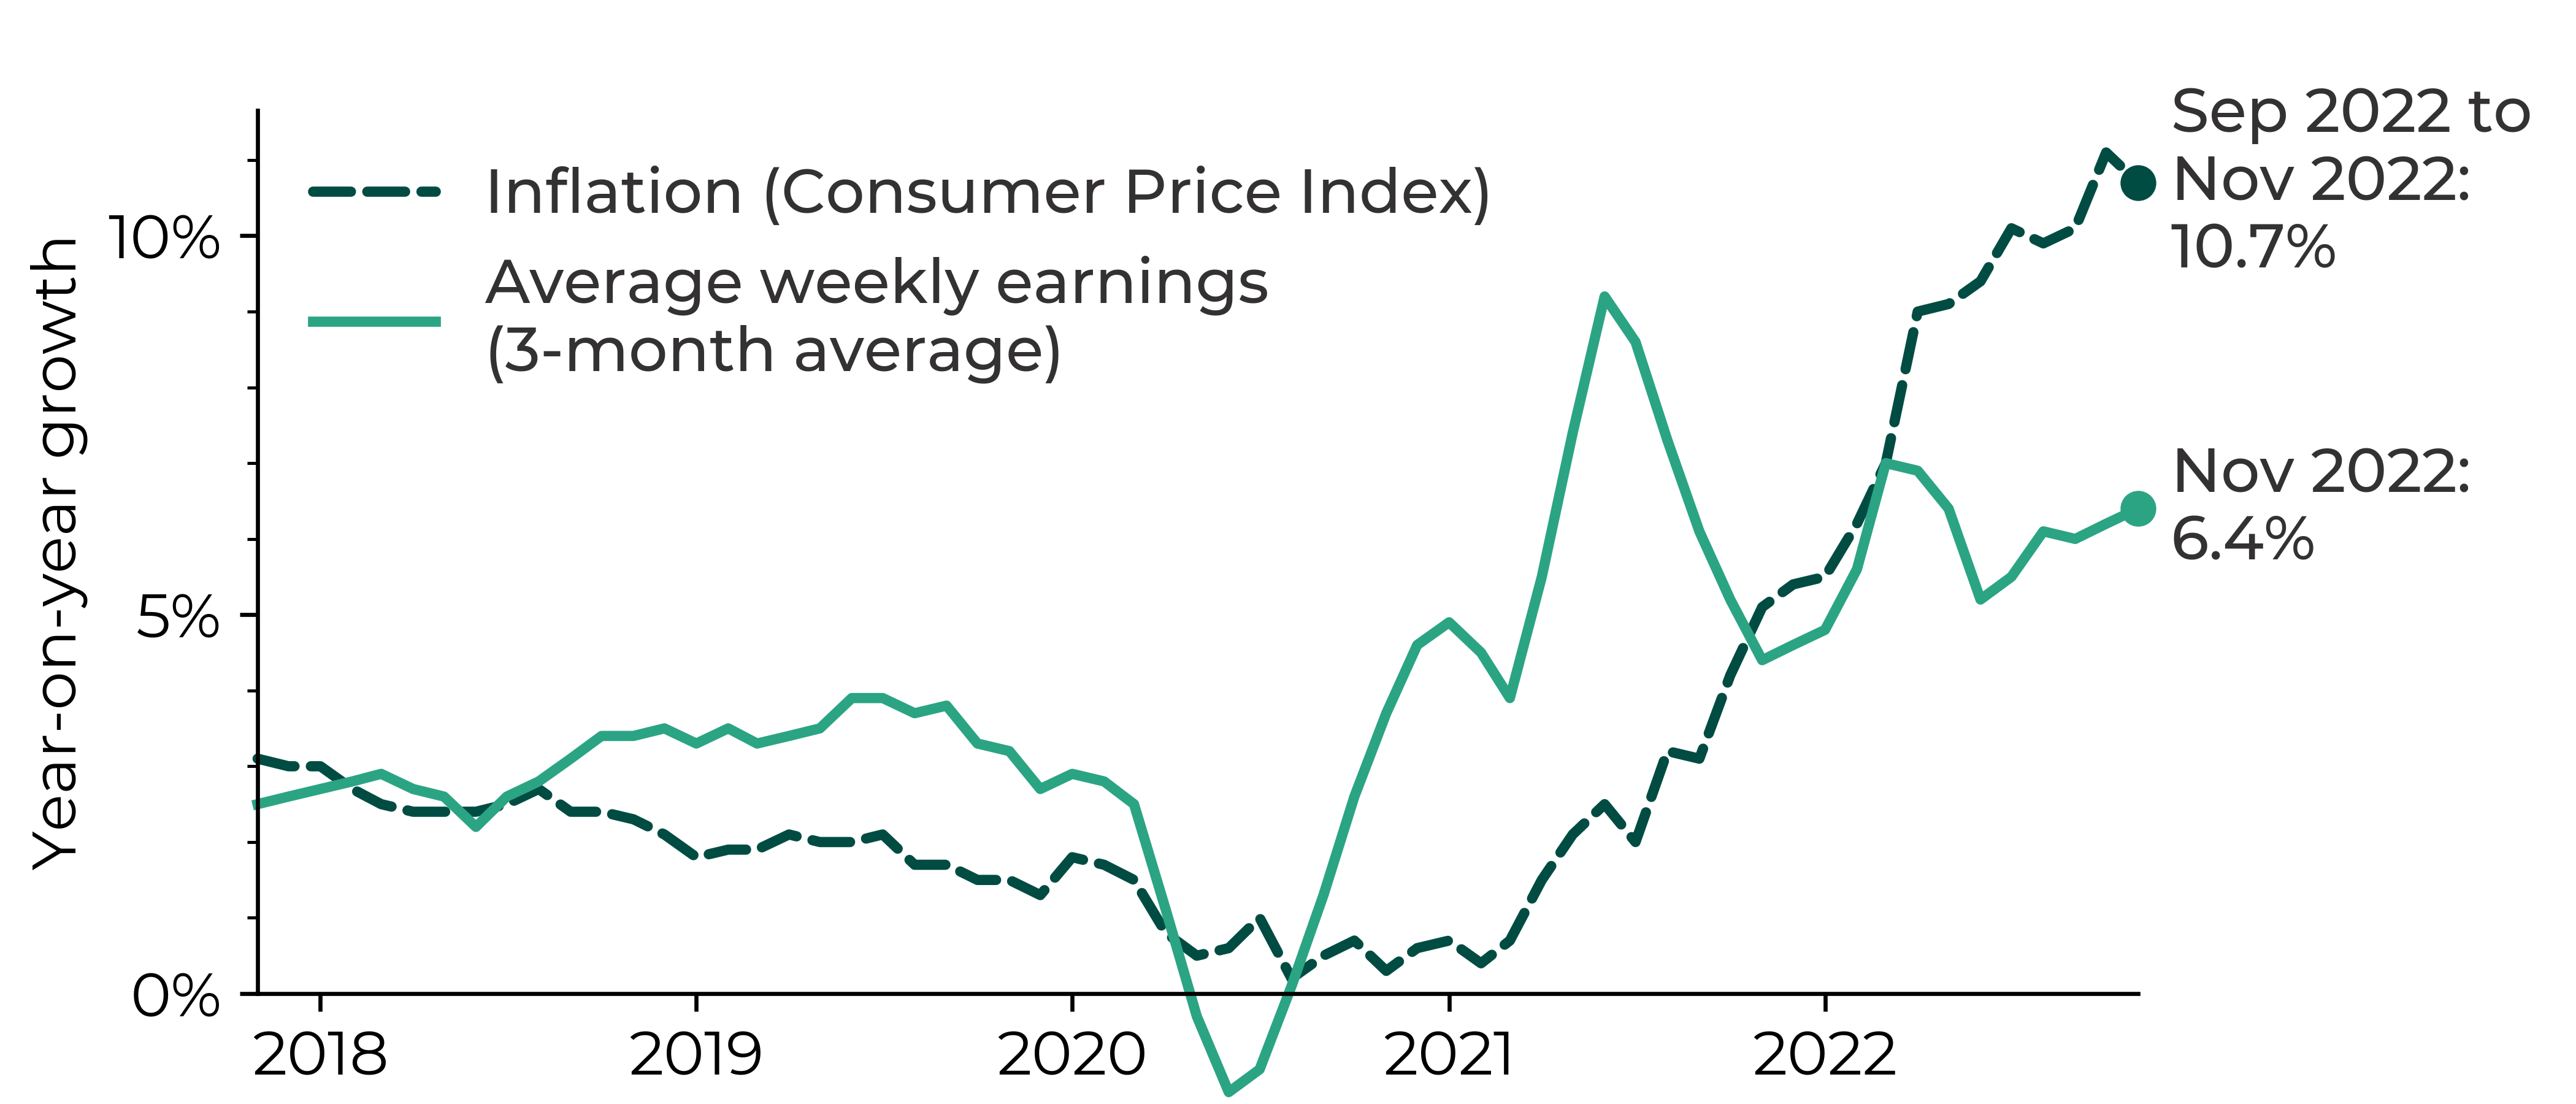 Graph showing UK inflation exceeding average weekly earnings (3-month average) in 2022. In November 2022, the average weekly earnings were 6.4% higher than for November 2021 whereas the Consumer Price Index inflation was at 10.7%.